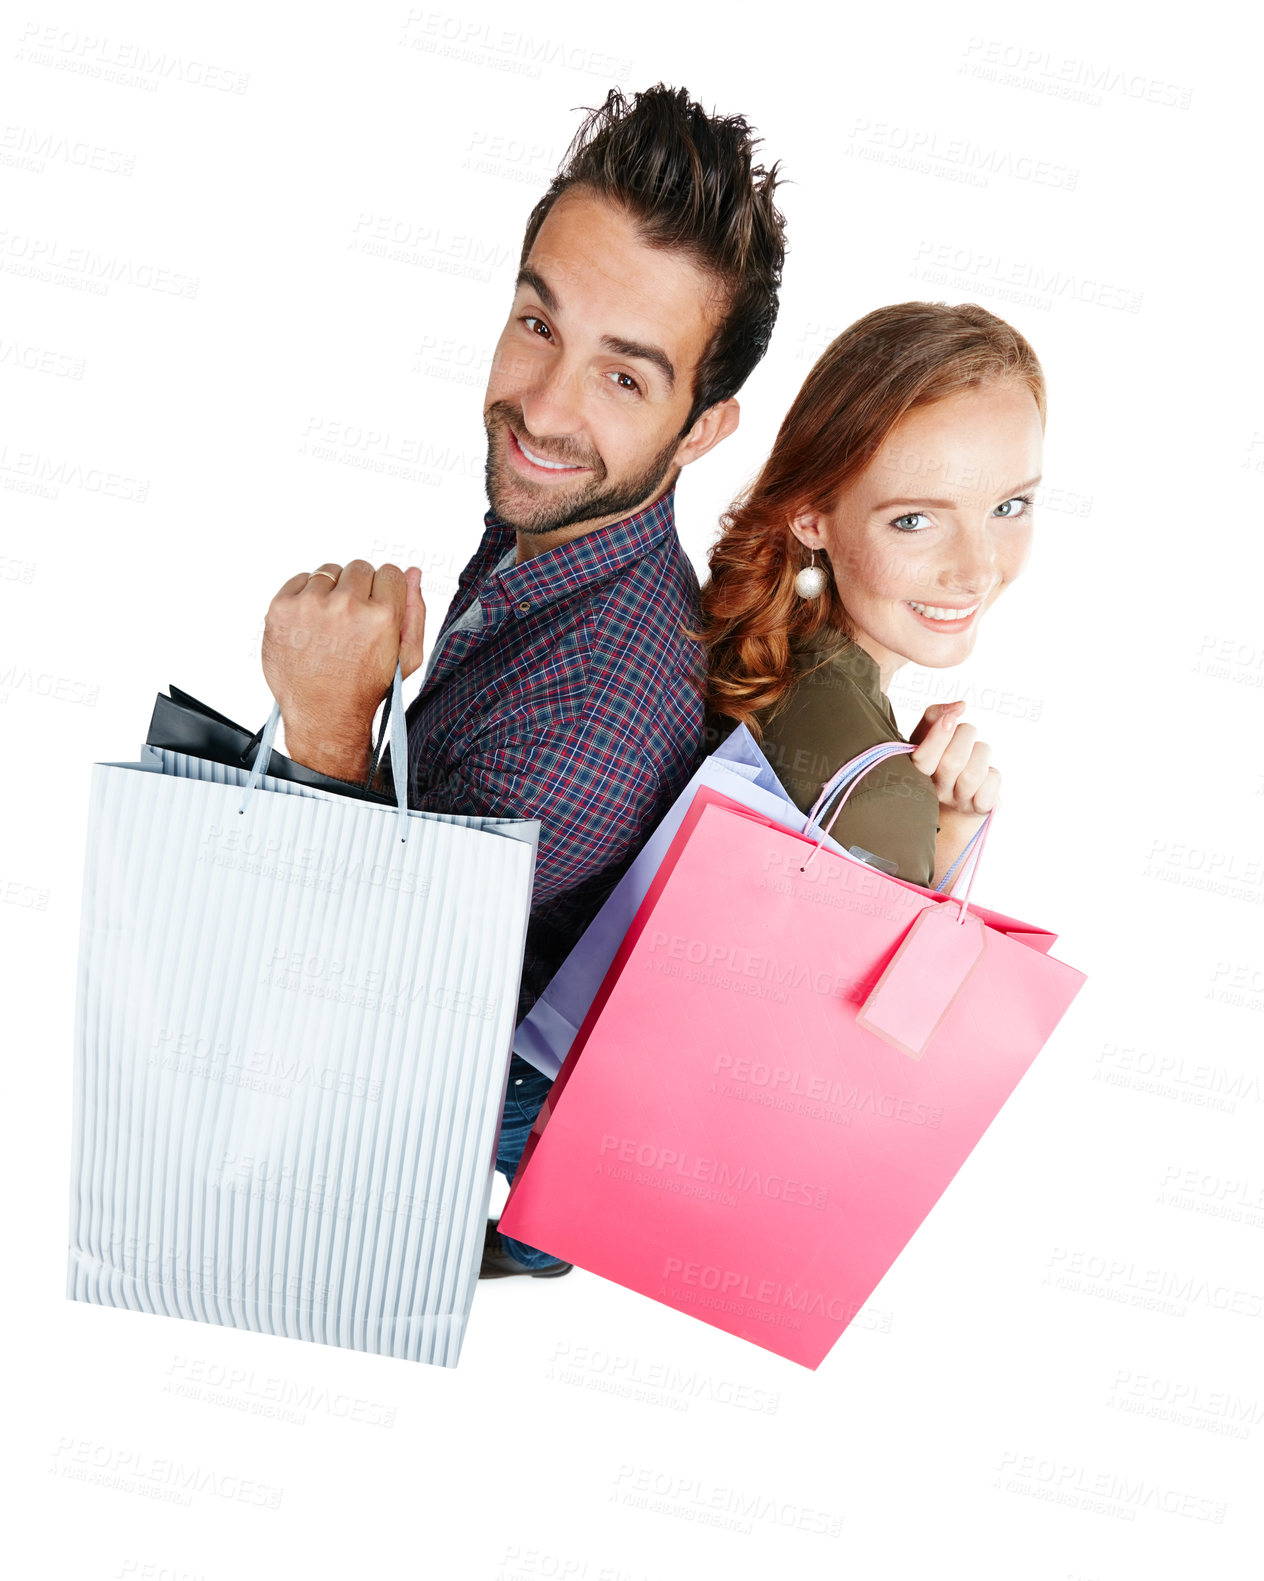 Buy stock photo Shot of a couple holding shopping bags against a white background